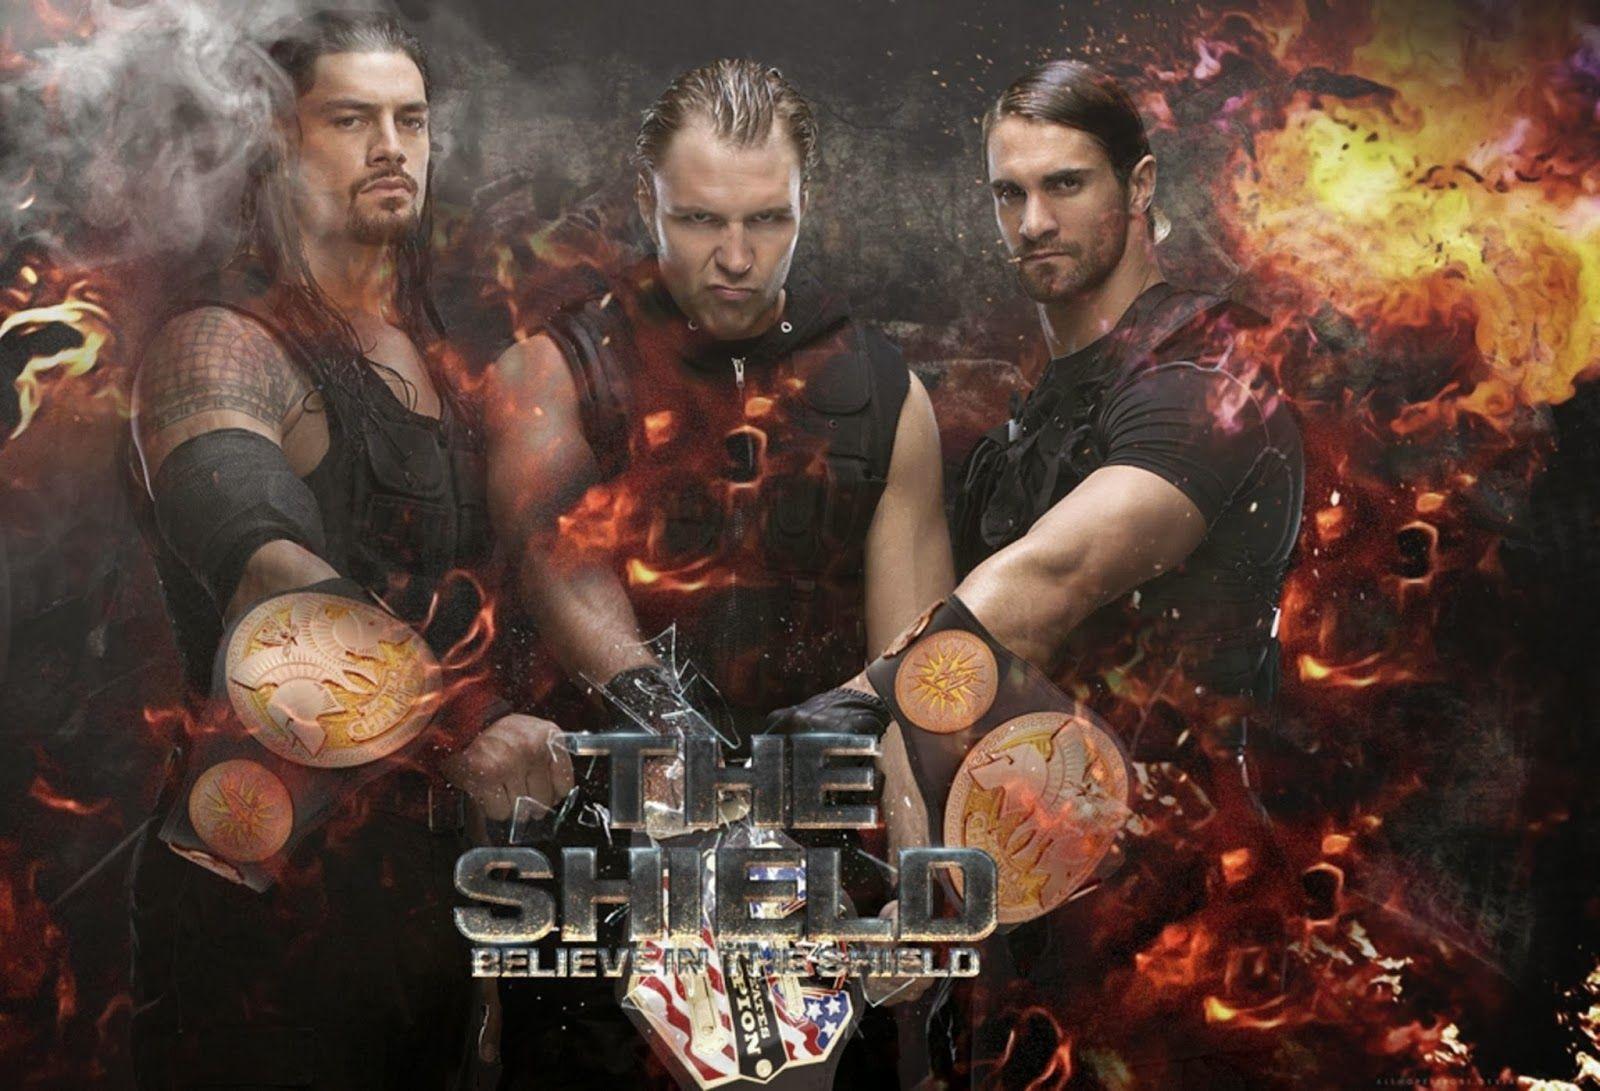 WWE The Shield HD Picture. Image, Photo and Wallpaper